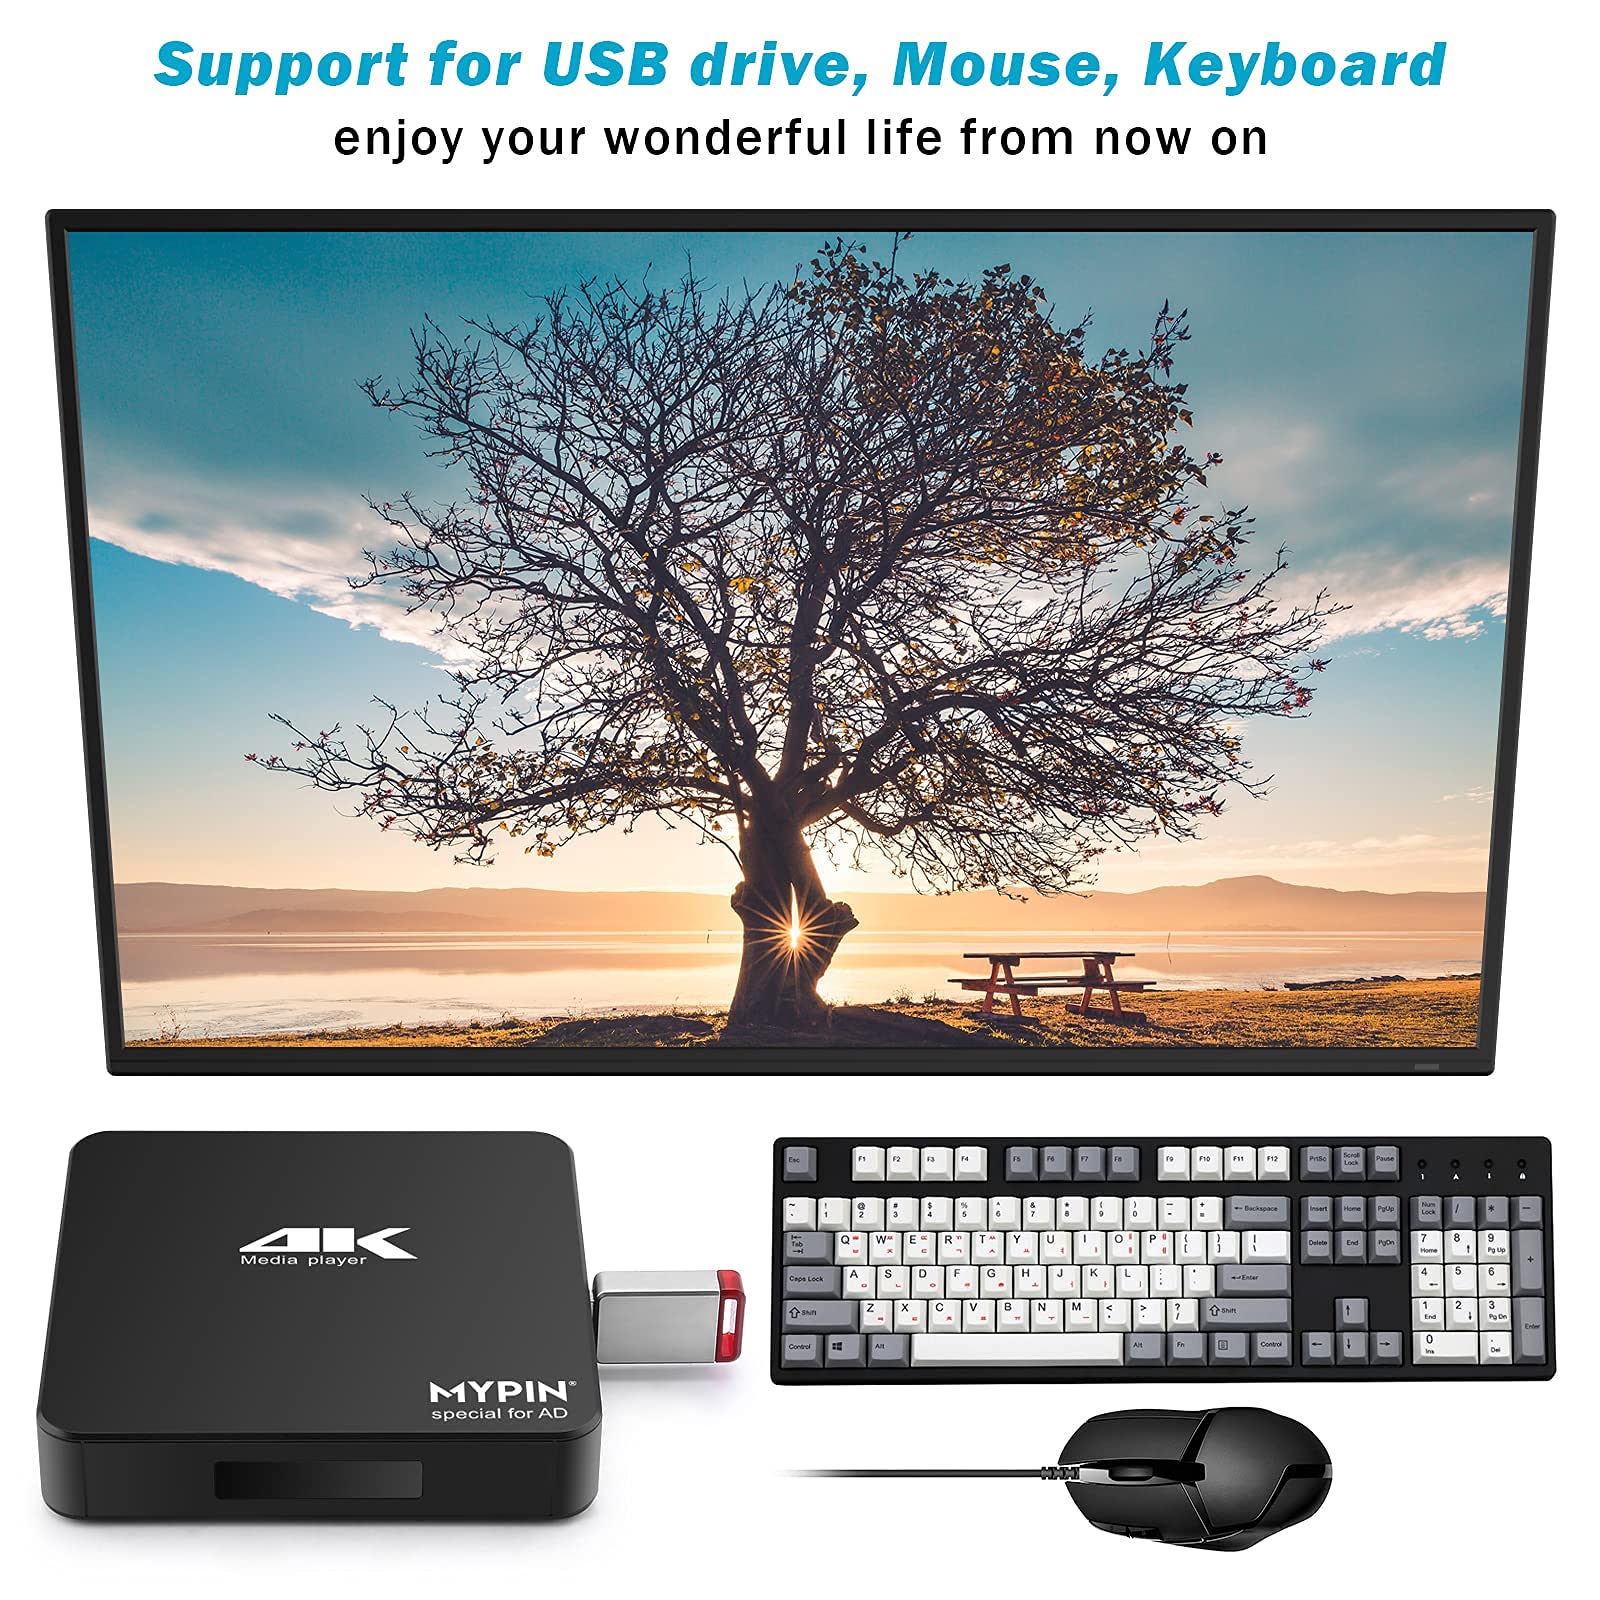 4K@60hz MP4 Media Player with ONE AV Cable Support 8TB HDD/ 256G USB Drive/SD Card with HDMI/AV Out for HDTV/PPT MKV AVI MP4 H.265-Support Advertising Subtitles/Timing, Networkable, Mouse&Keyboard